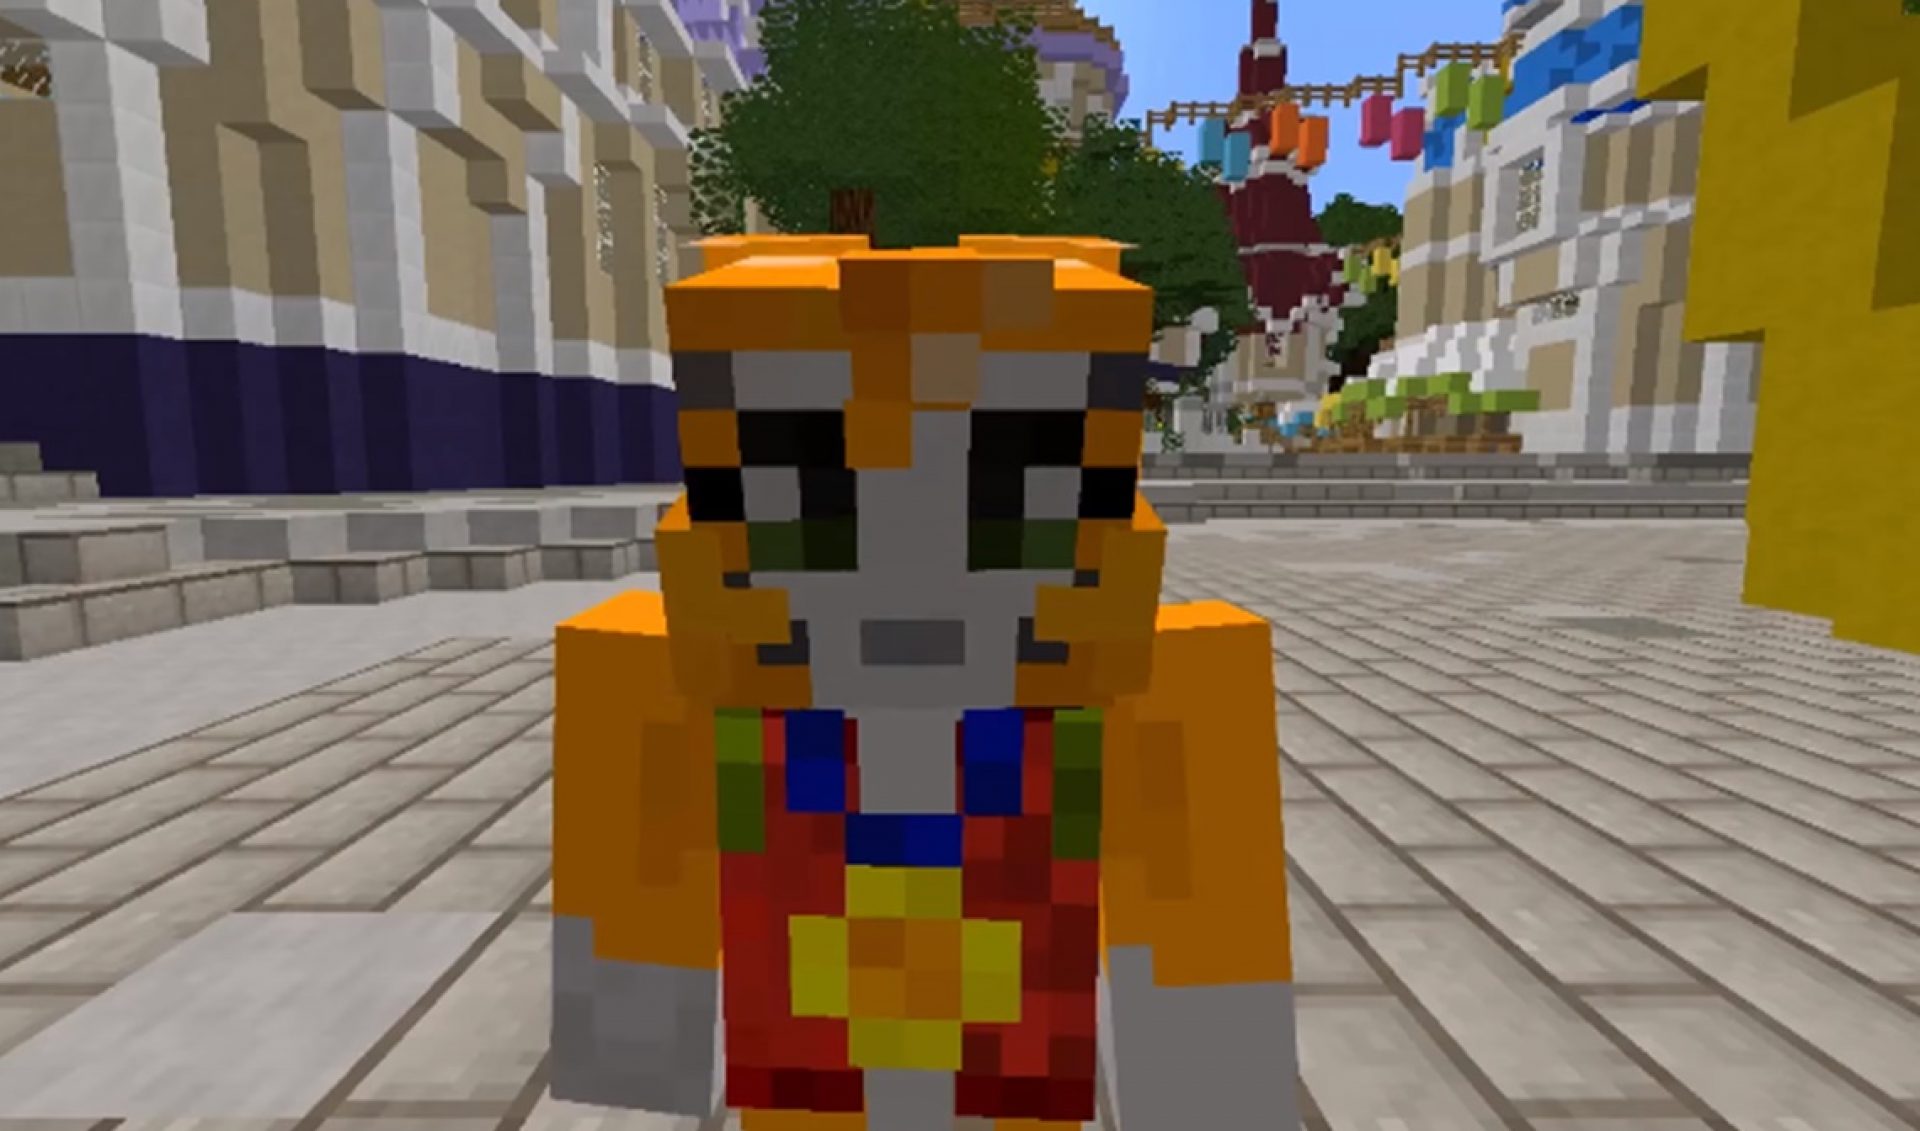 Maker Studios To Launch Season Two Of Stampy Cat’s Educational ‘Minecraft’ Series